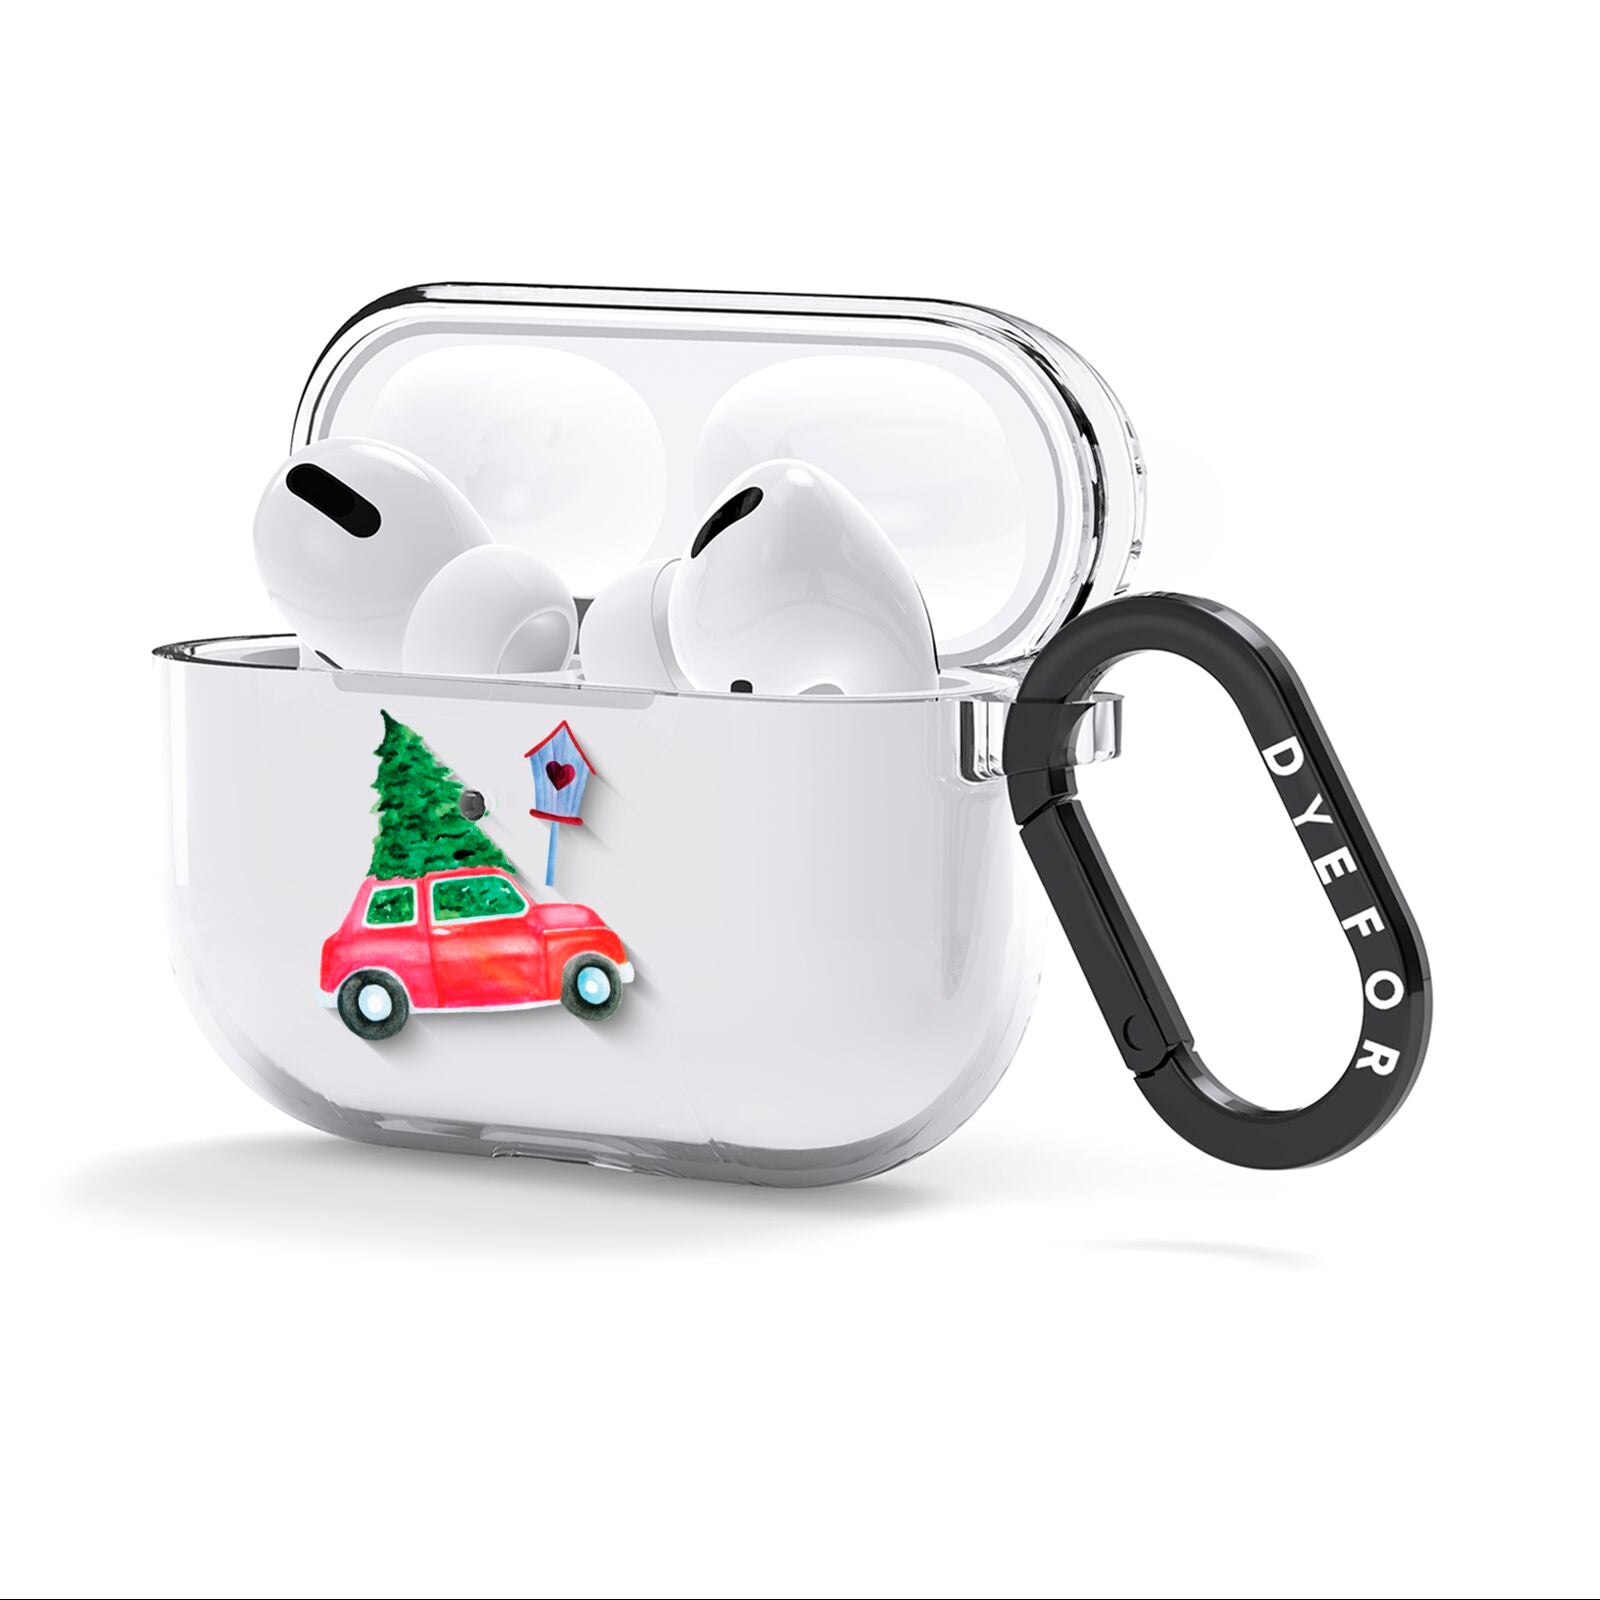 Driving home for Christmas AirPods Clear Case 3rd Gen Side Image